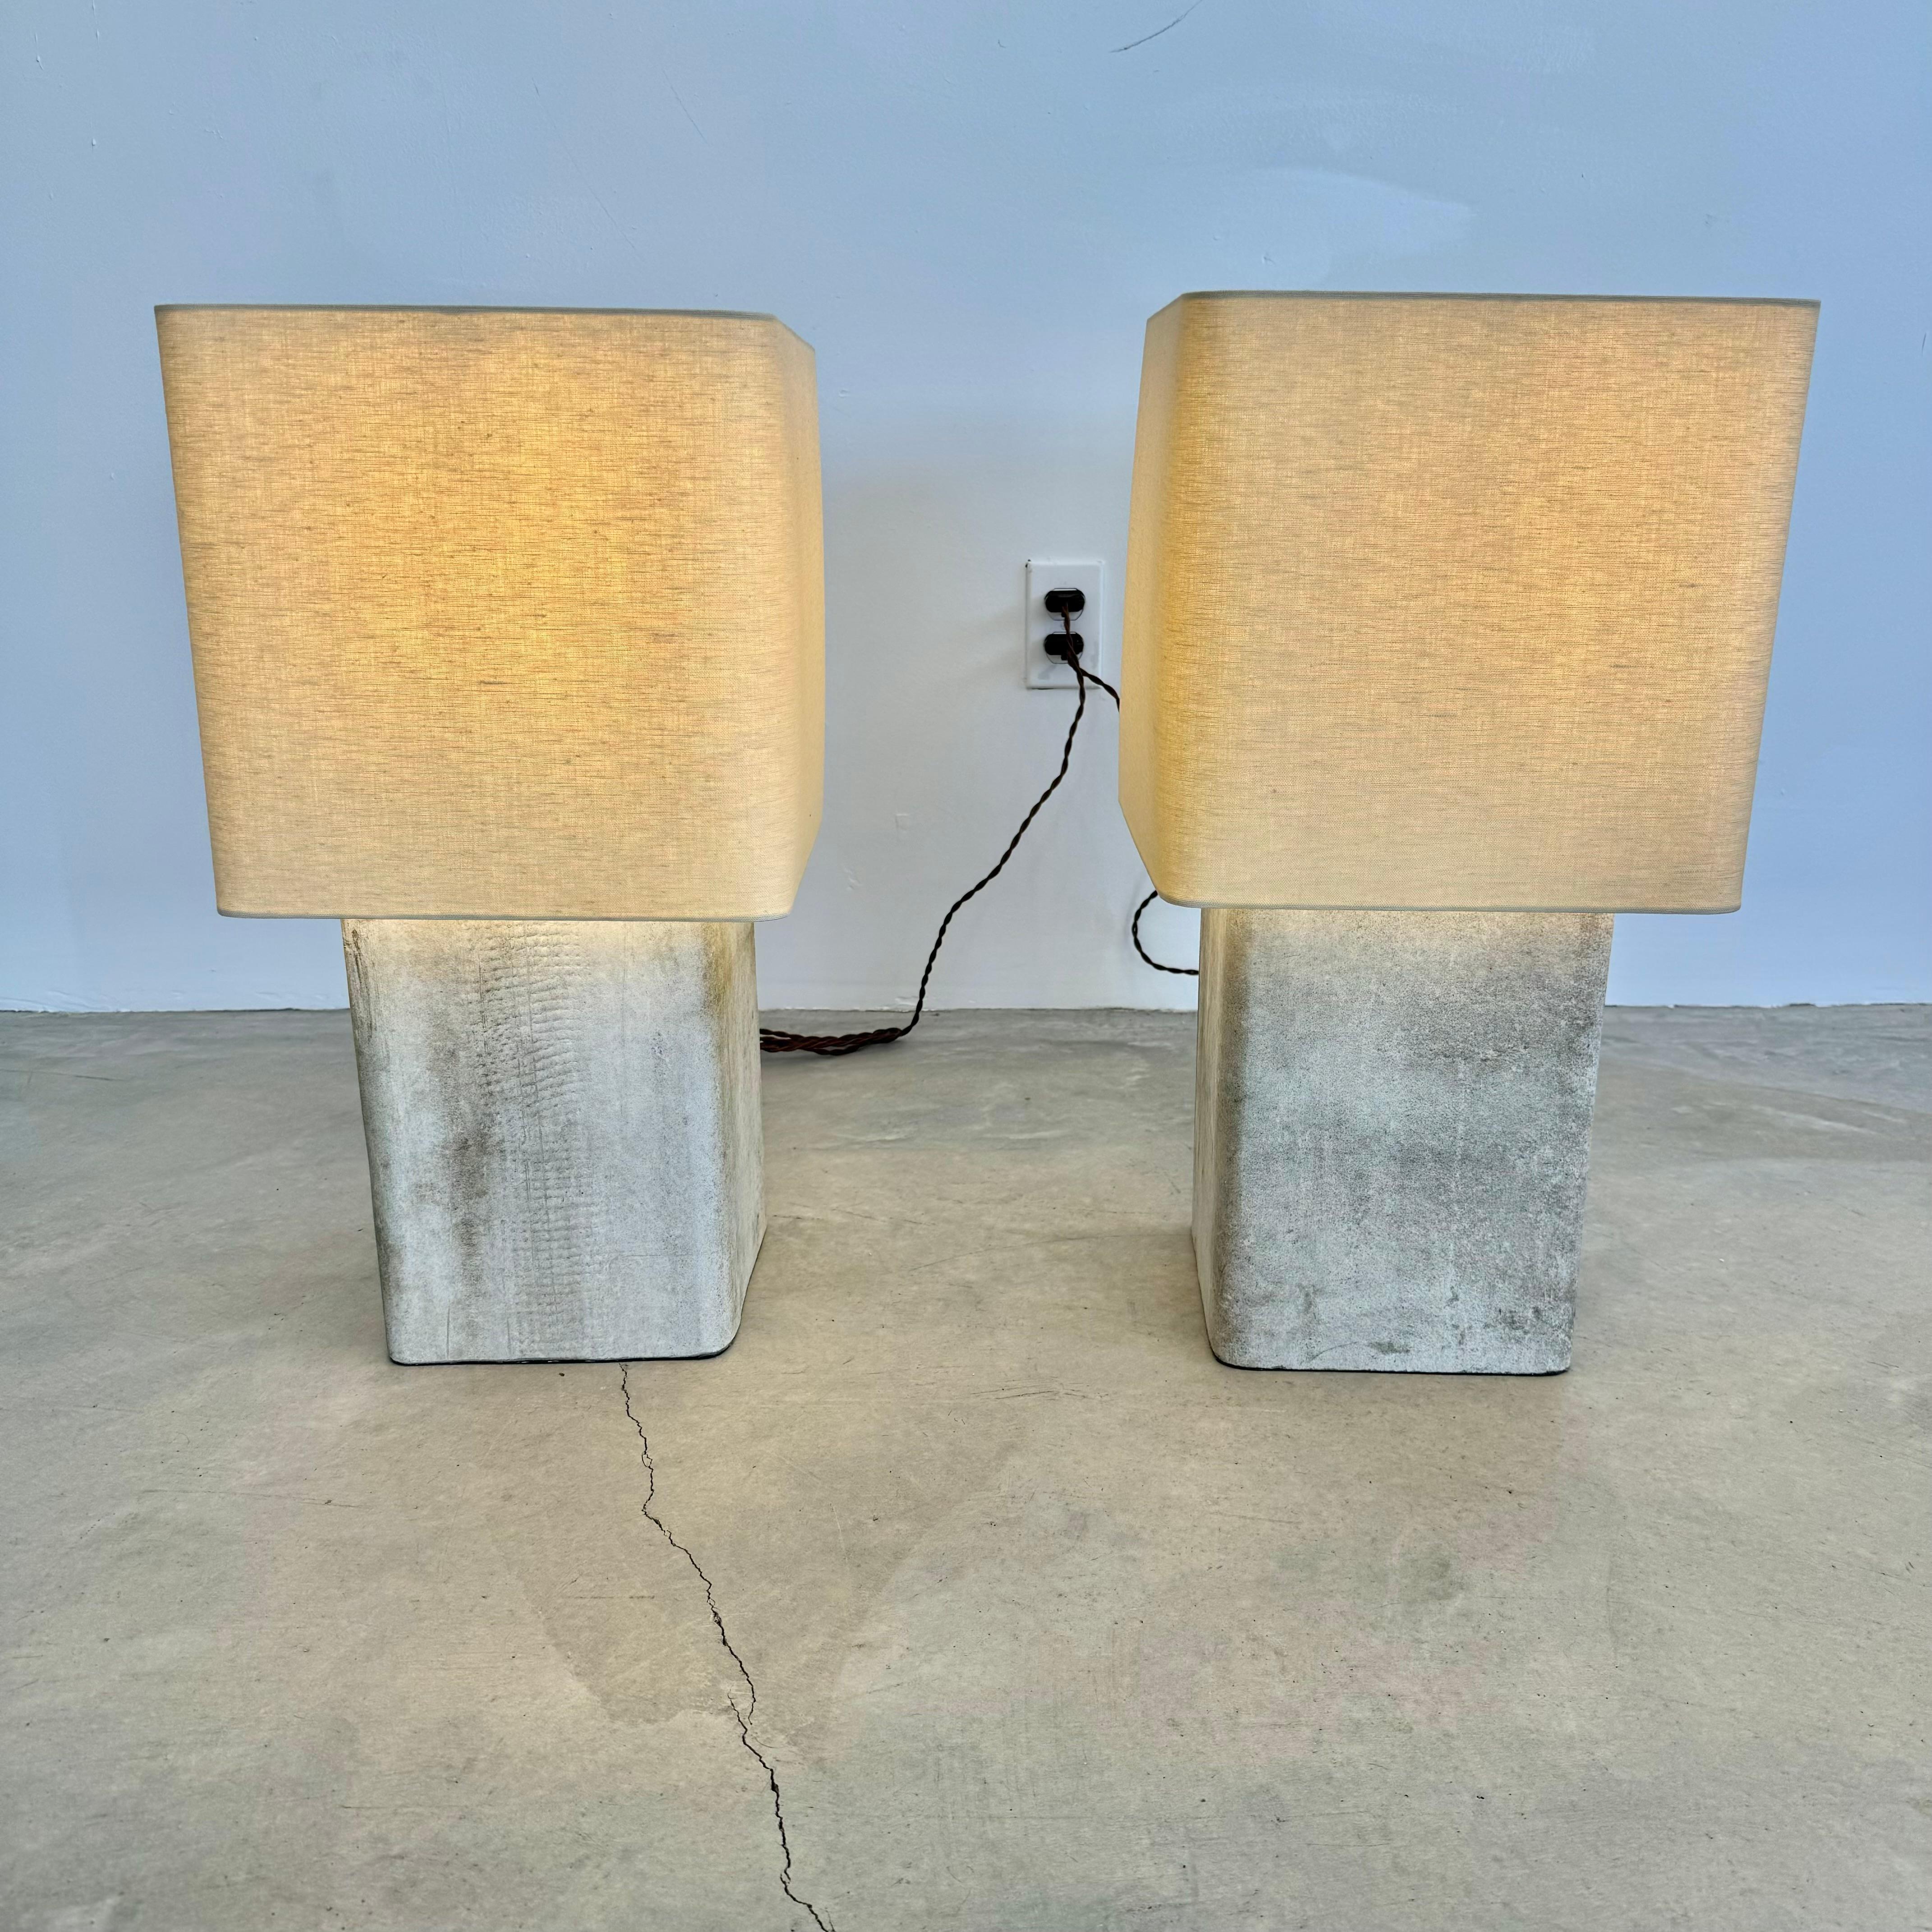 Stunning concrete Willy Guhl lamp by Eternit with teak top cover. Concrete made in Swizterland. Newly fitted as a lamp, re-wired with a new custom linen shade with rounded edges and light diffusor on top. Stunning simplicity and beautiful texture